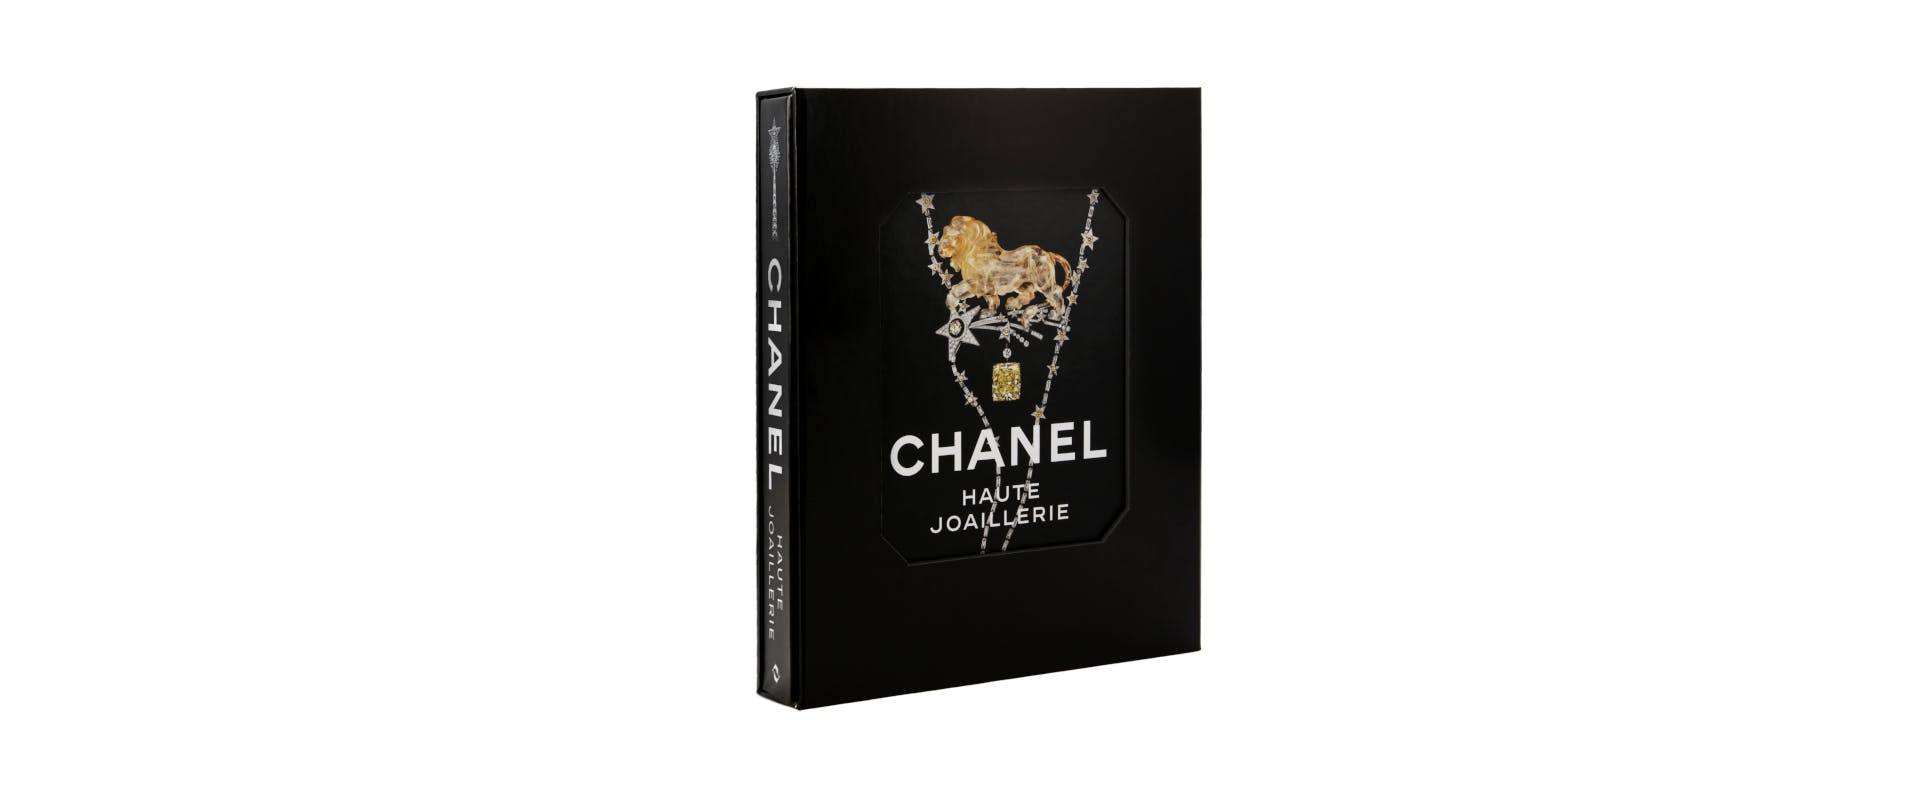 A Spectacular Book Celebrates The Exceptional CHANEL High Jewelry